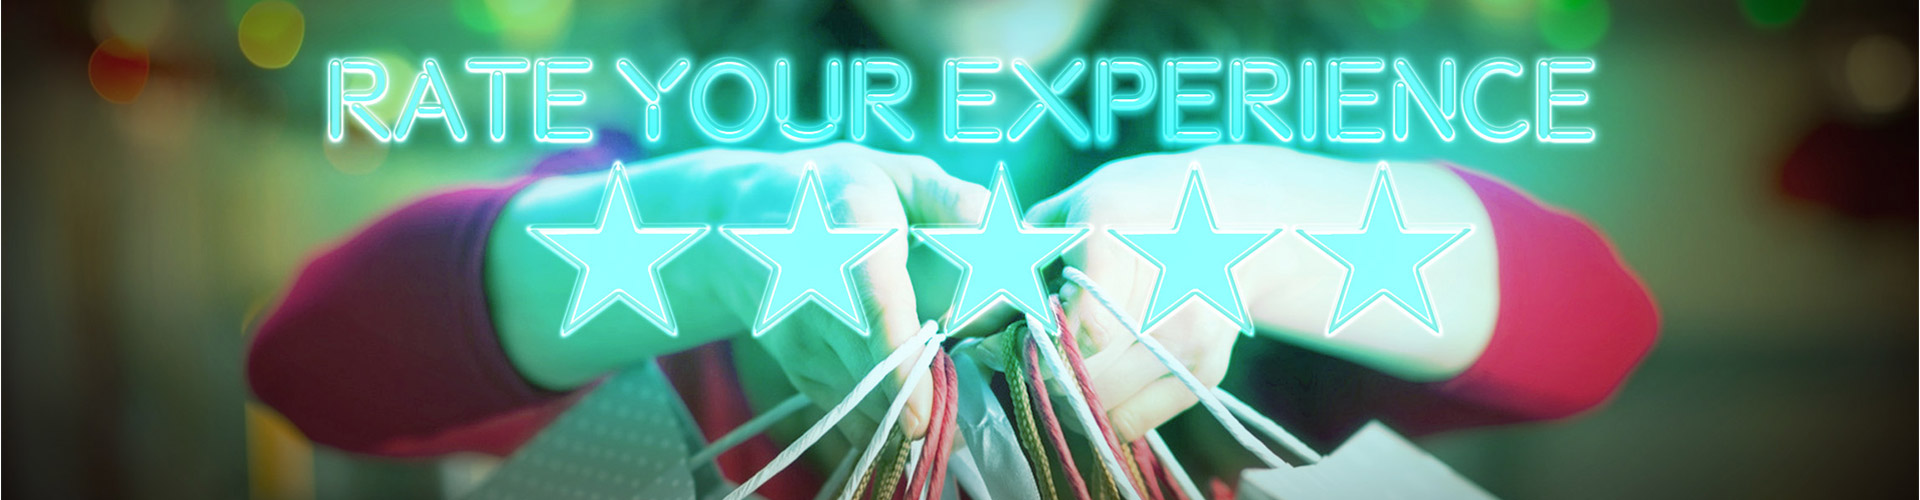 Blog banner featuring glowing rate your experience text and five stars with woman holding shopping bags in the background